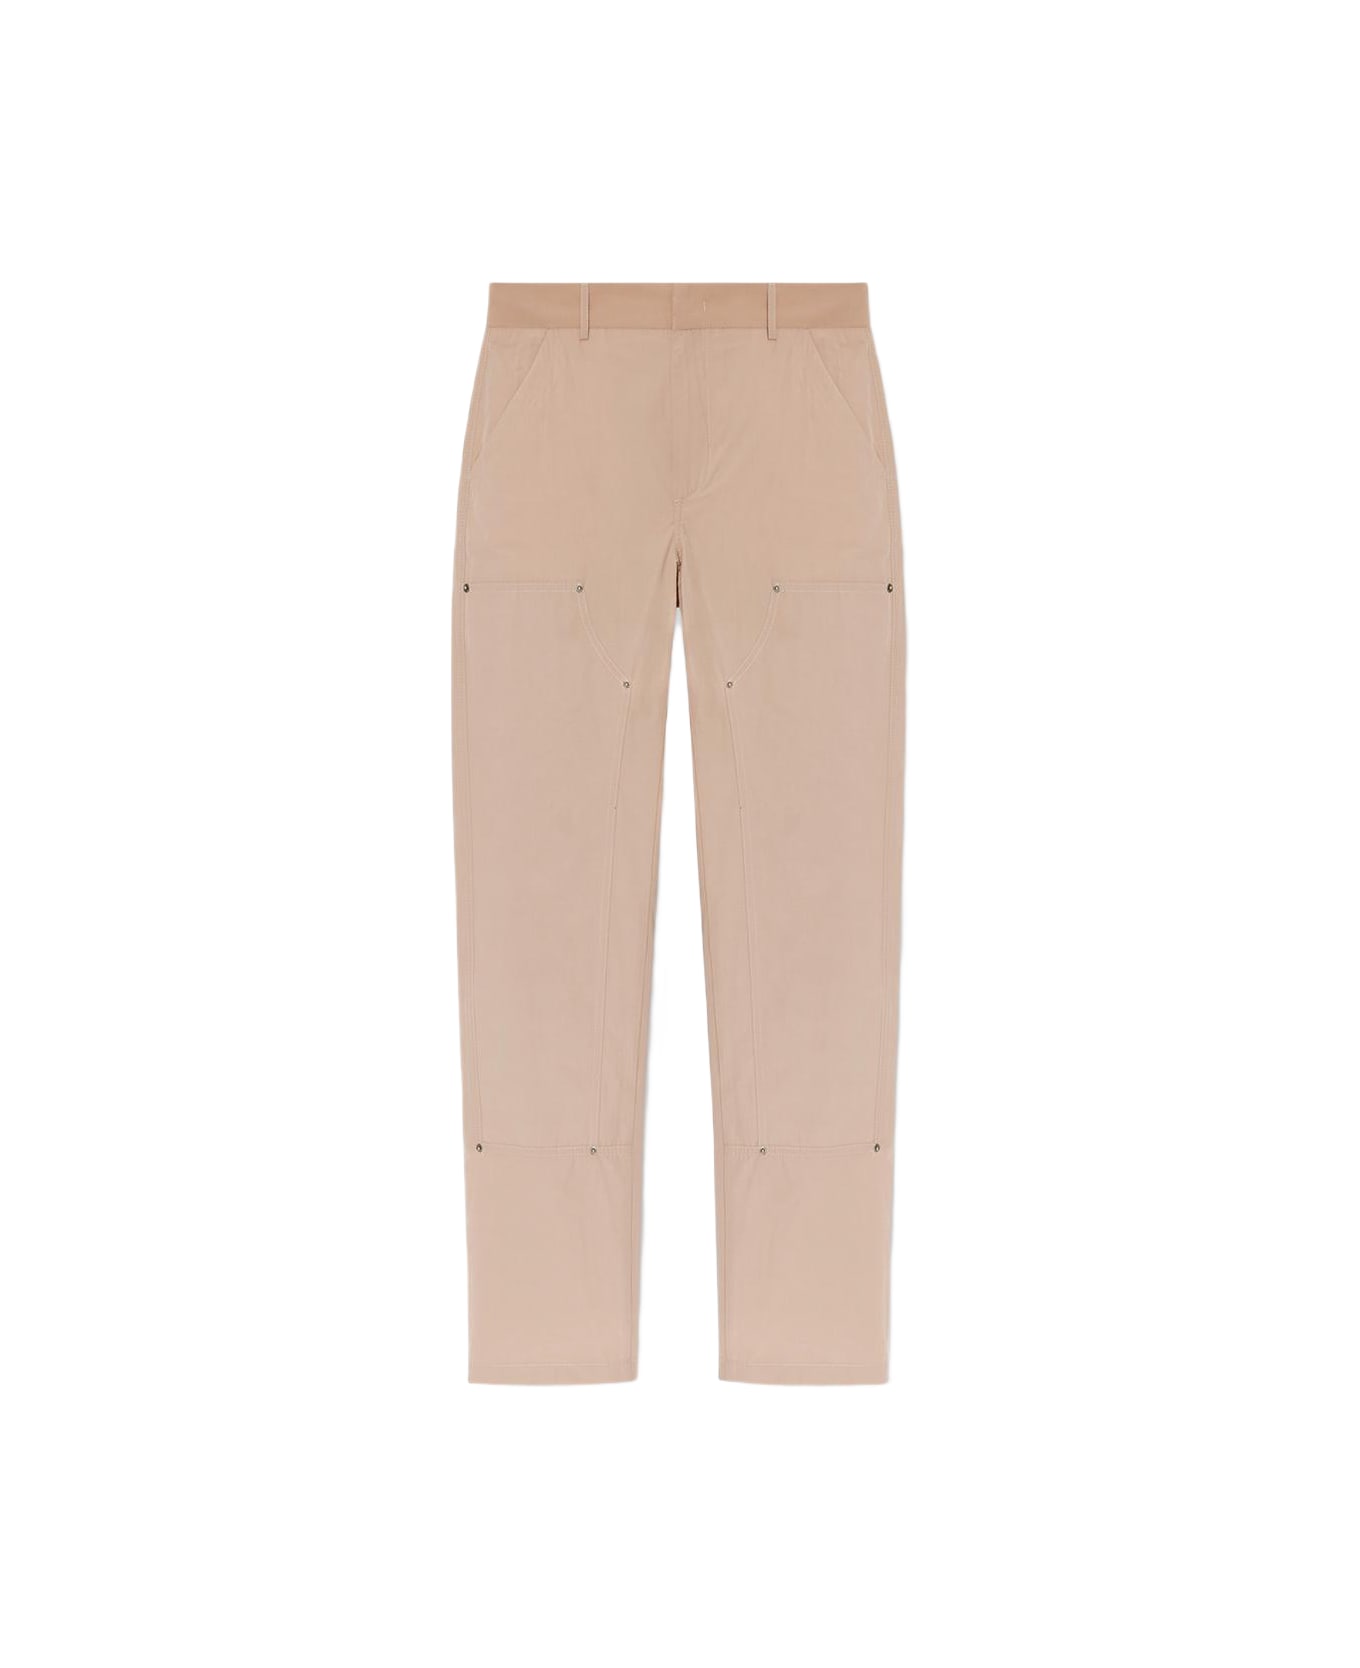 FourTwoFour on Fairfax Trousers With Pockets - Beige